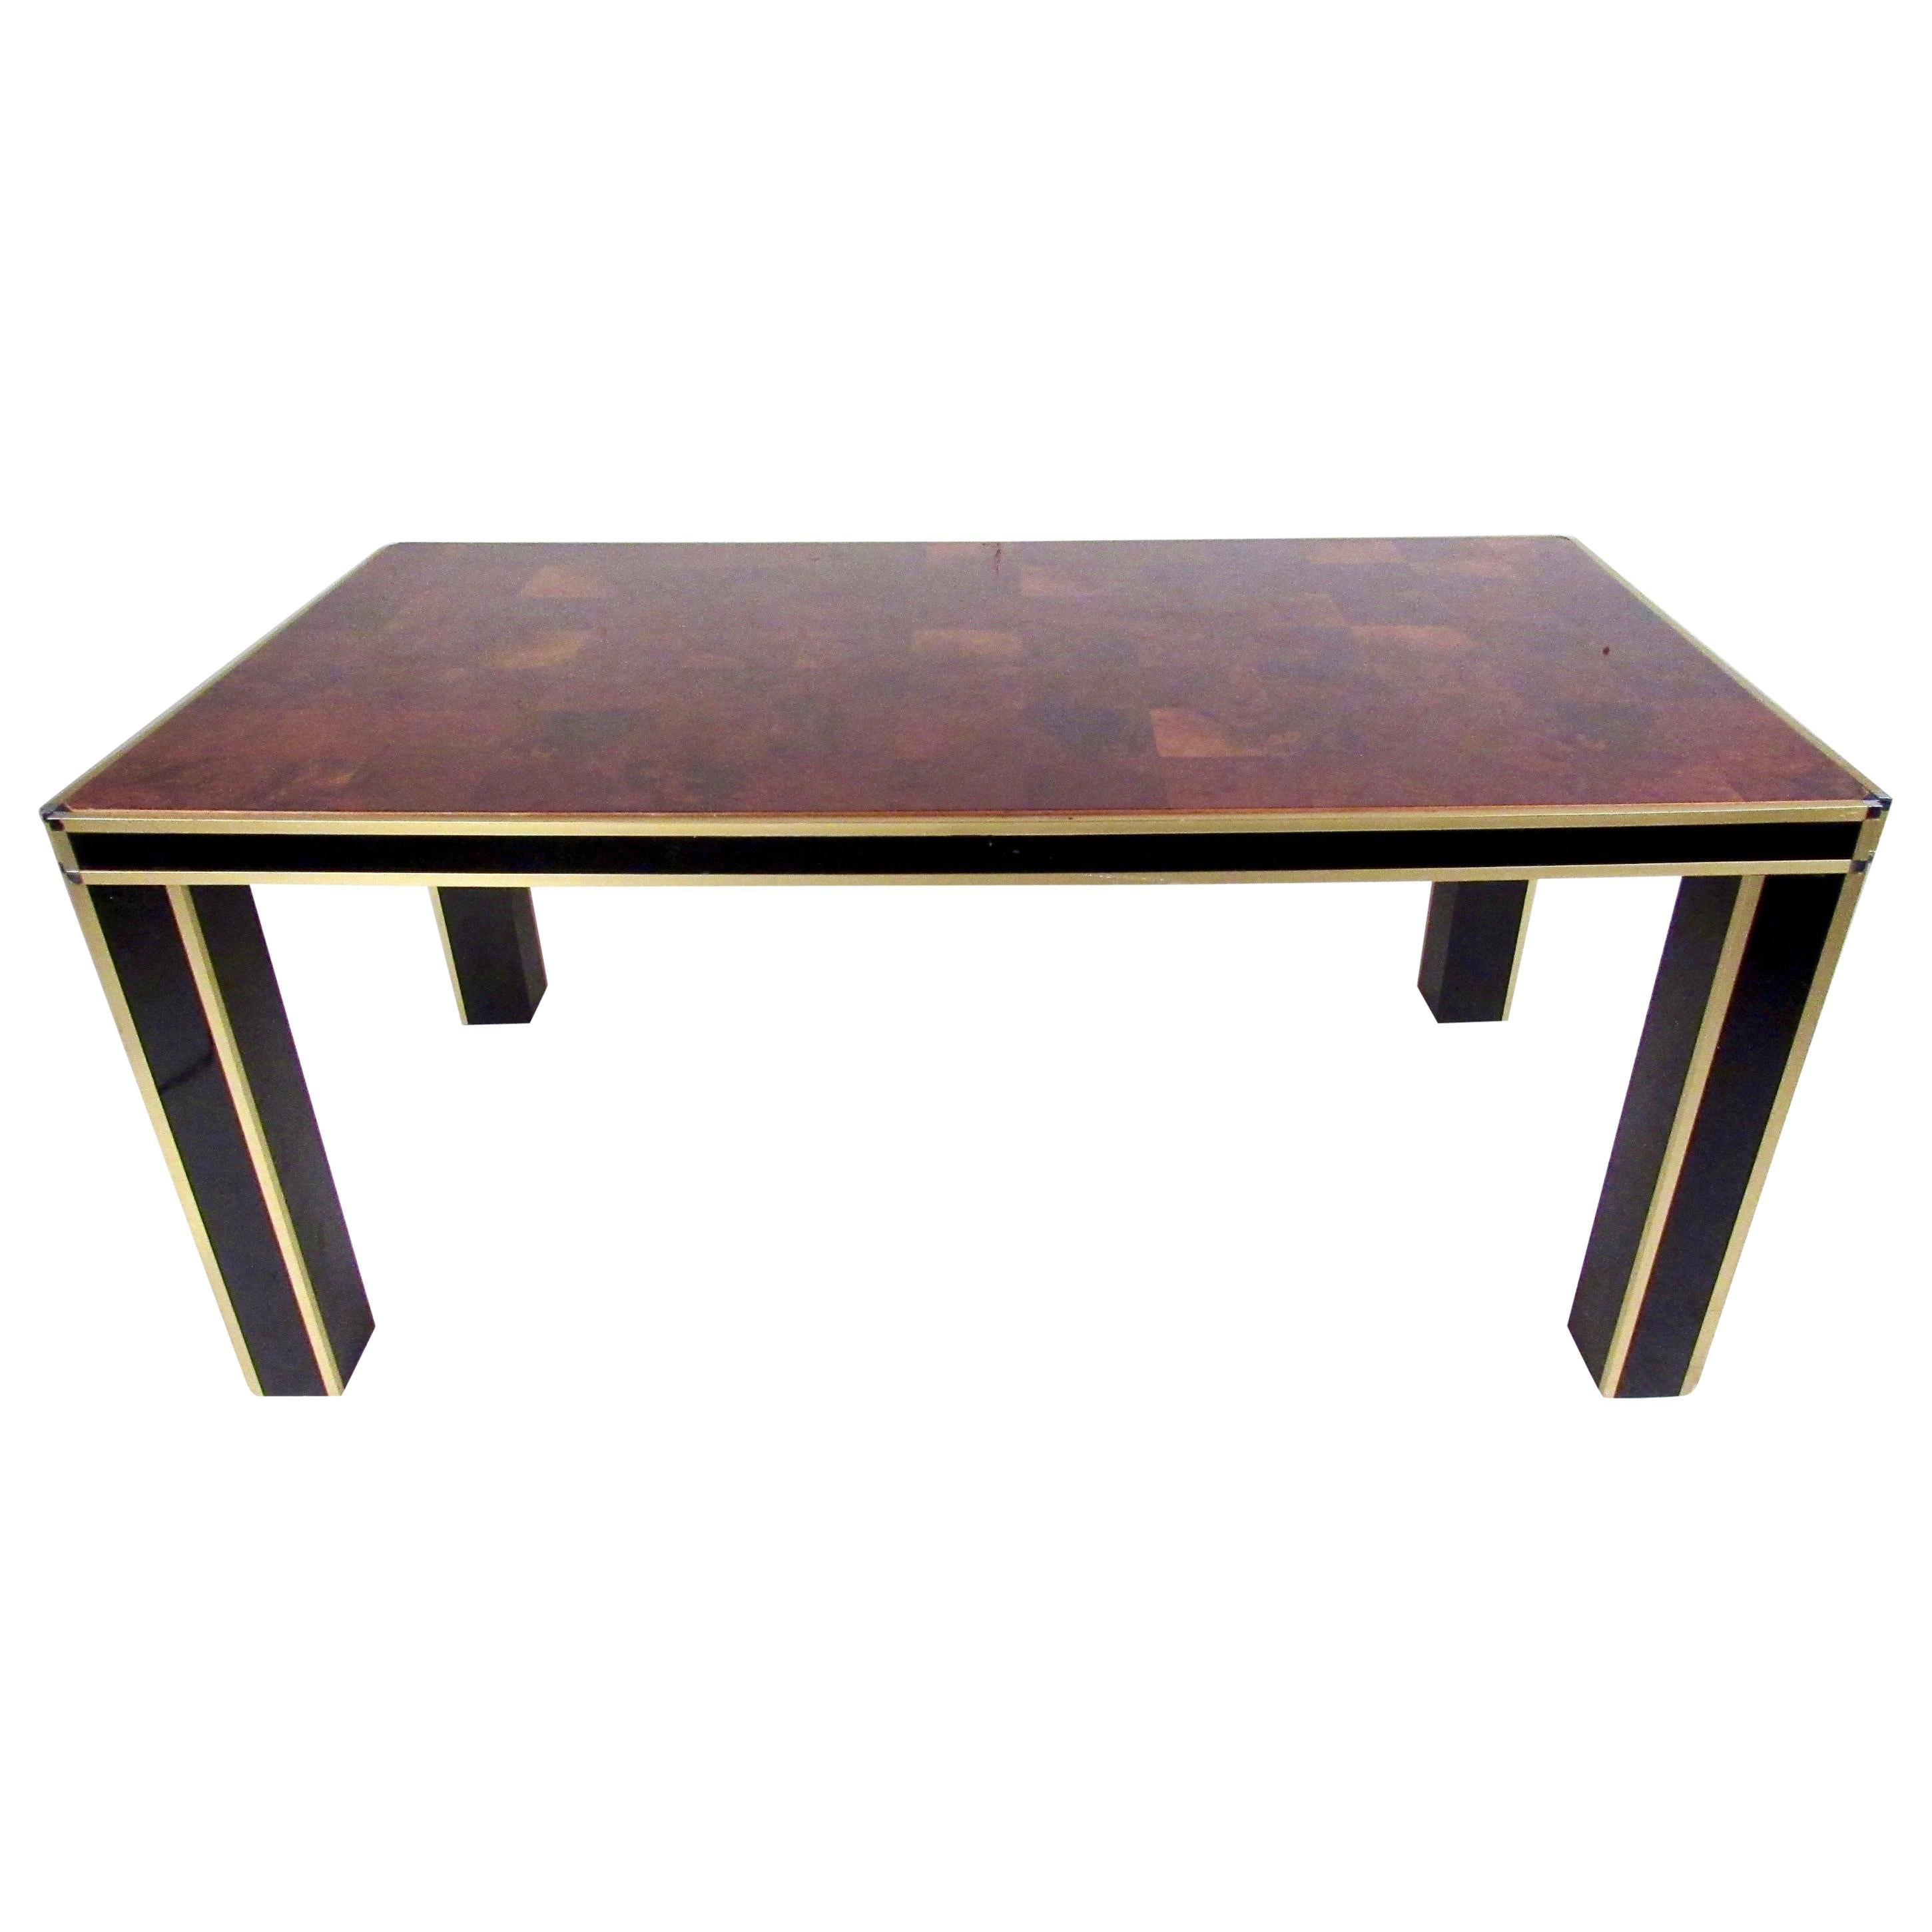 Italian Modern Conference or Dining Table